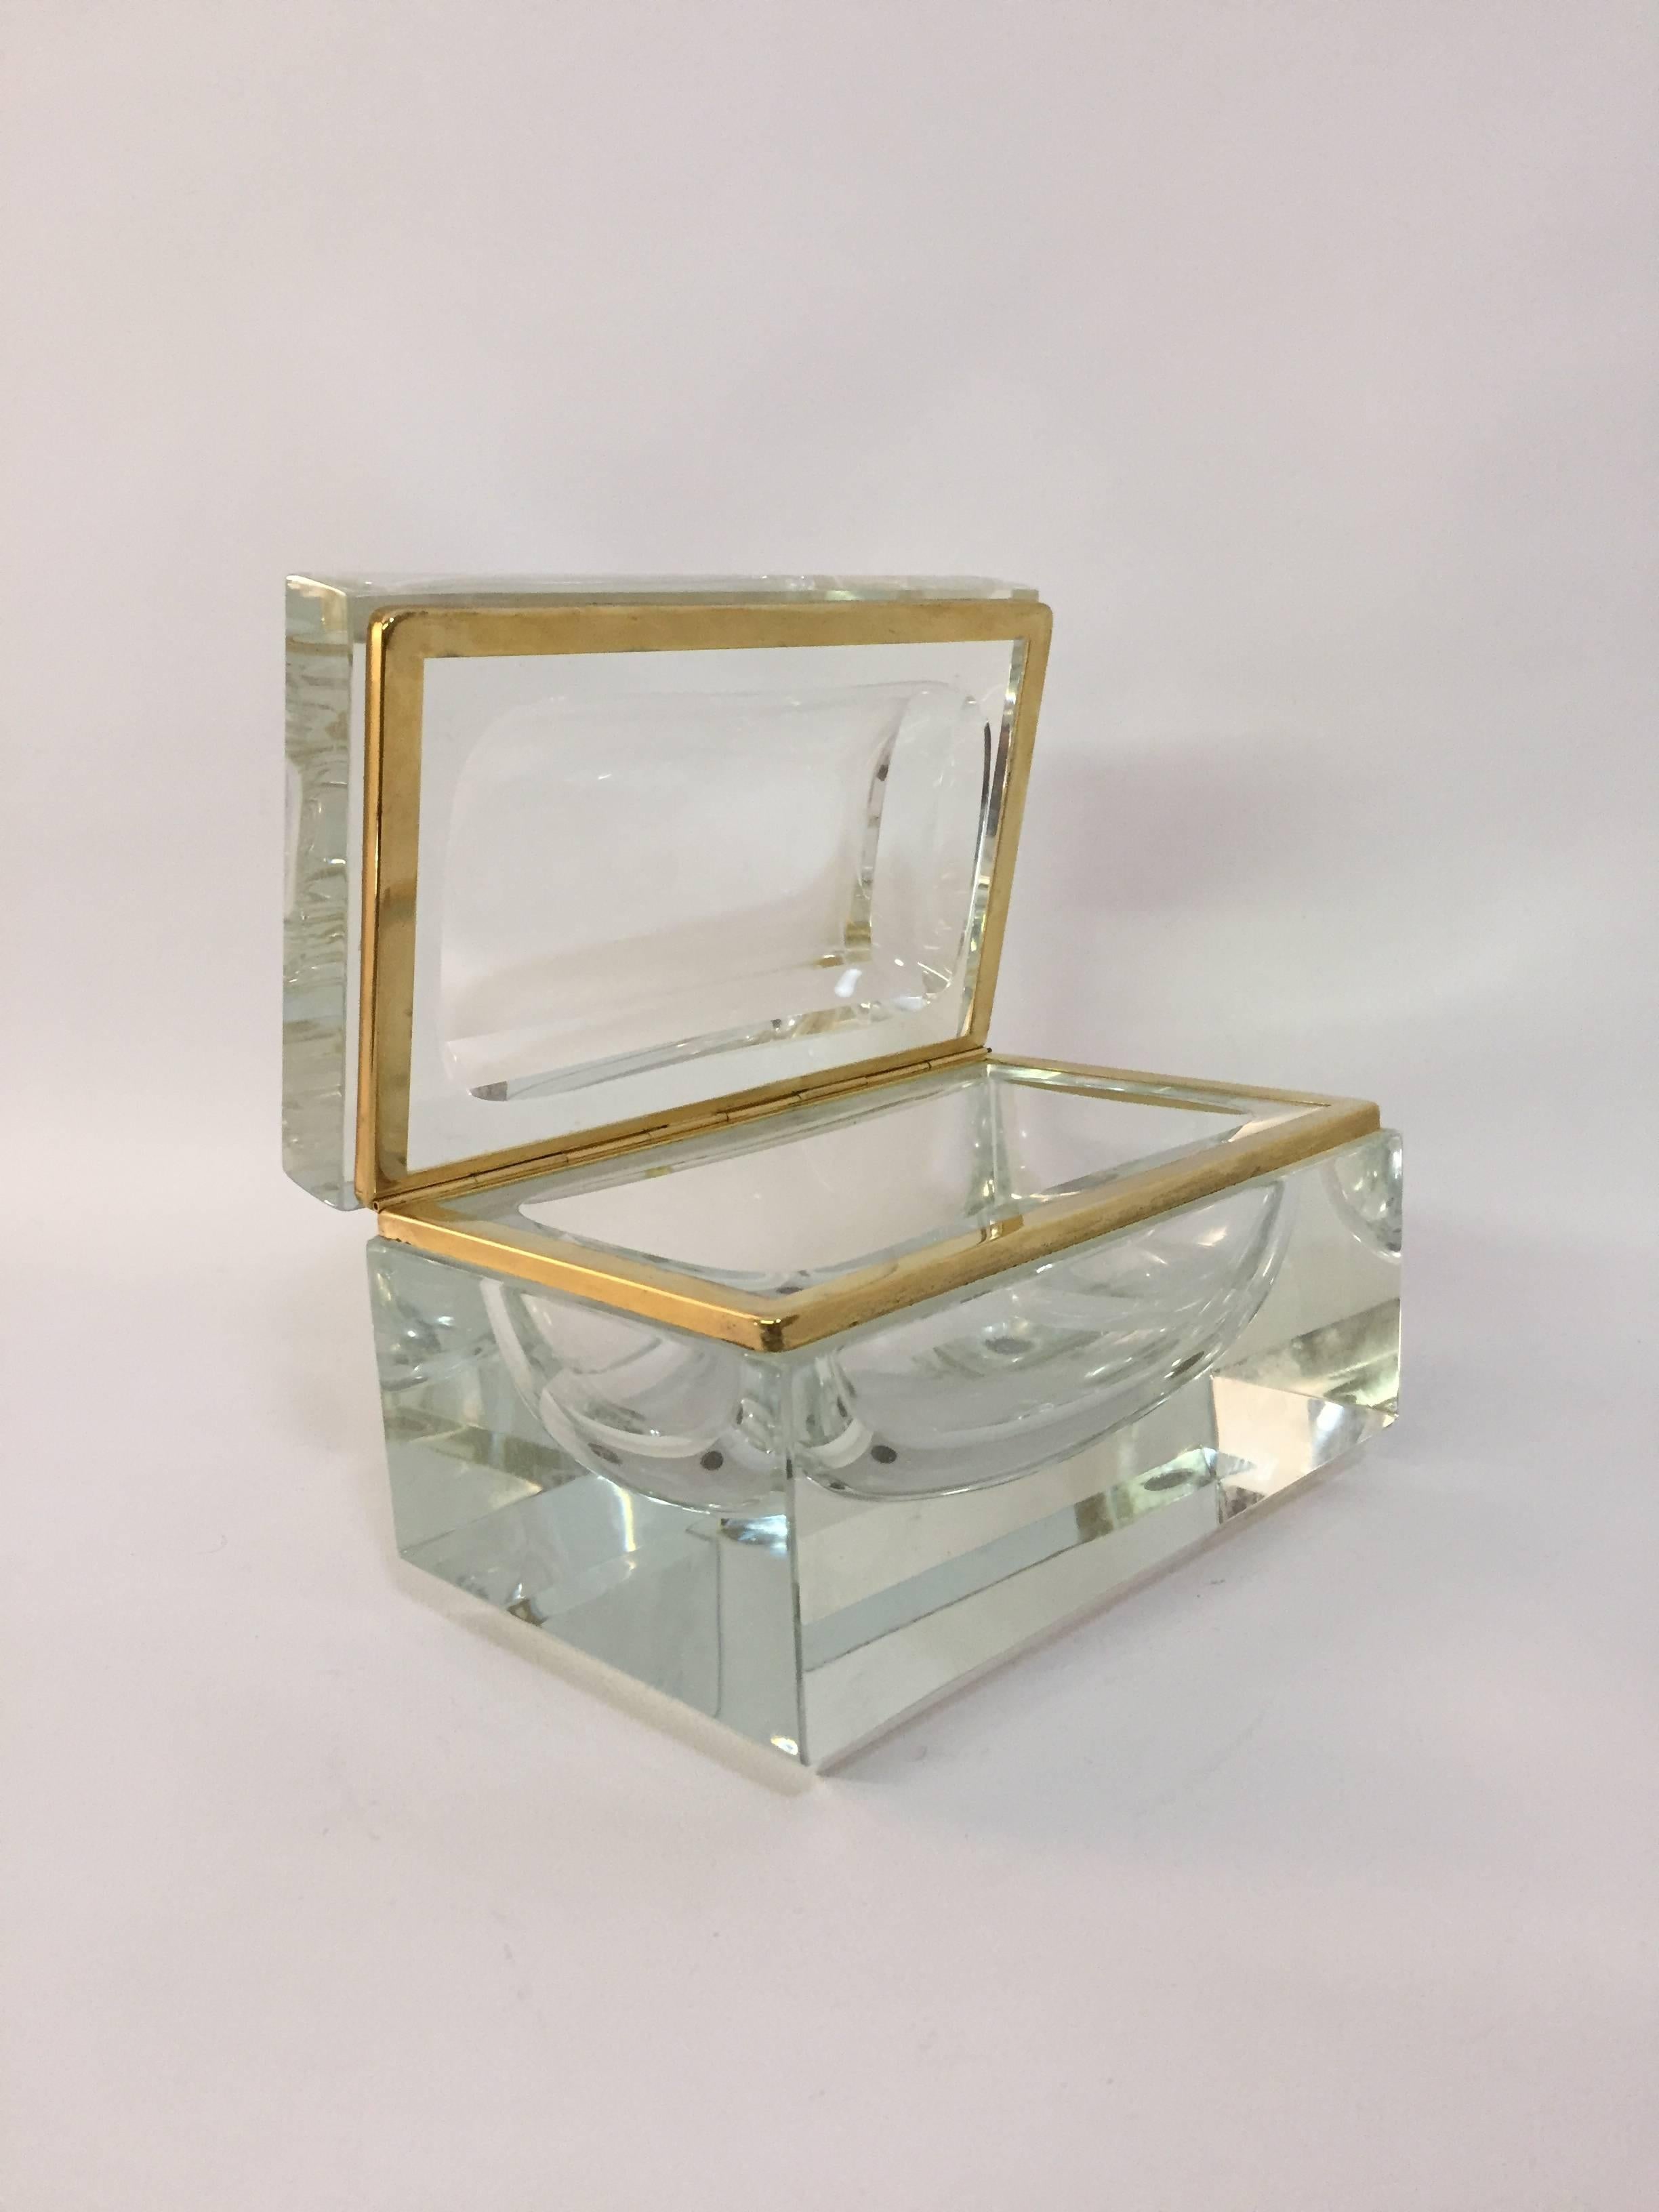 Heavy and chunky faceted glass box designed by Alessandro Mandruzzato. Wonderful concave 'scooped out' interior. Brass lip liner.